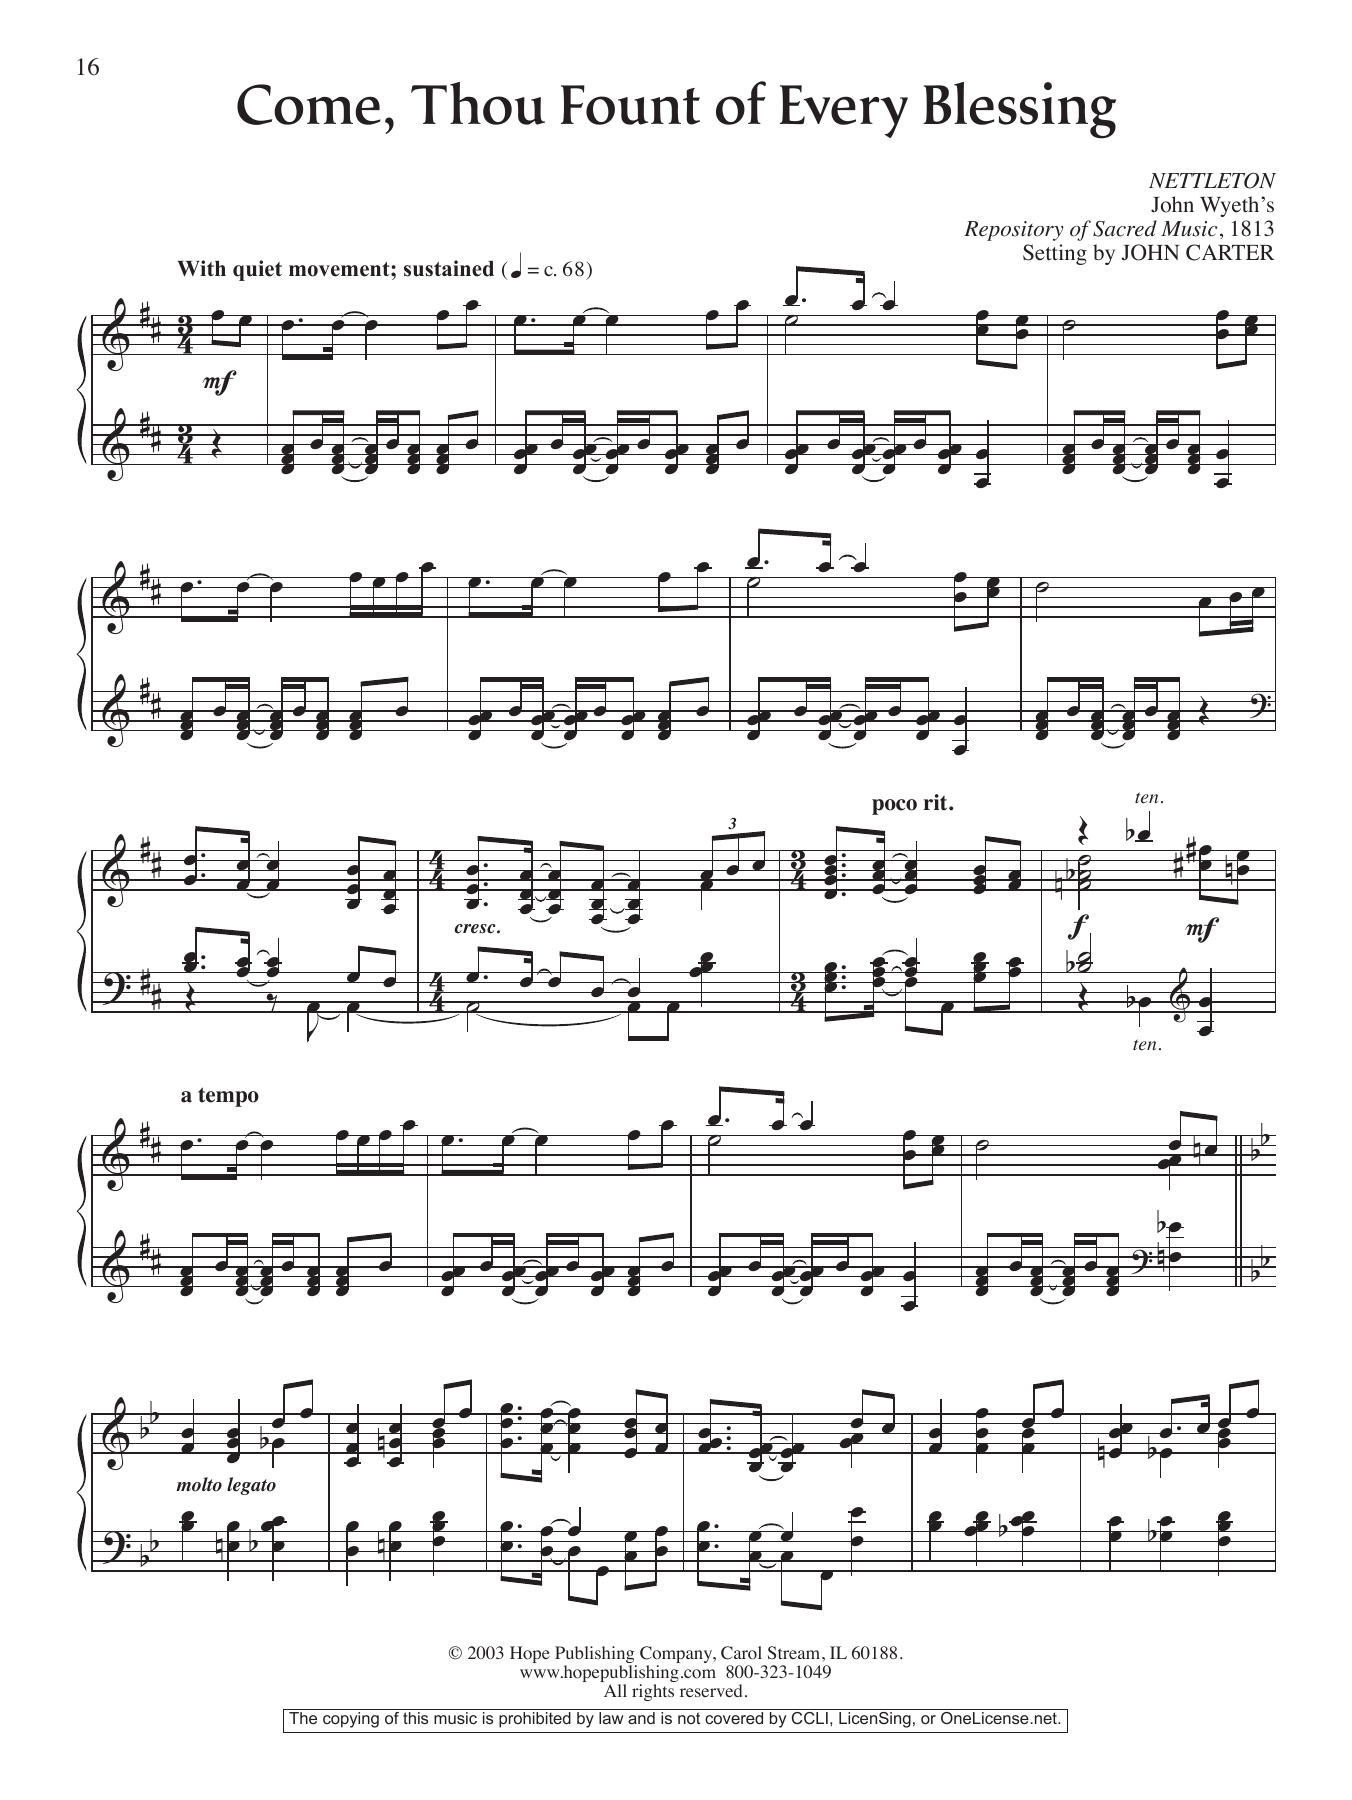 Download John Carter Come, Thou Fount of Every Blessing Sheet Music